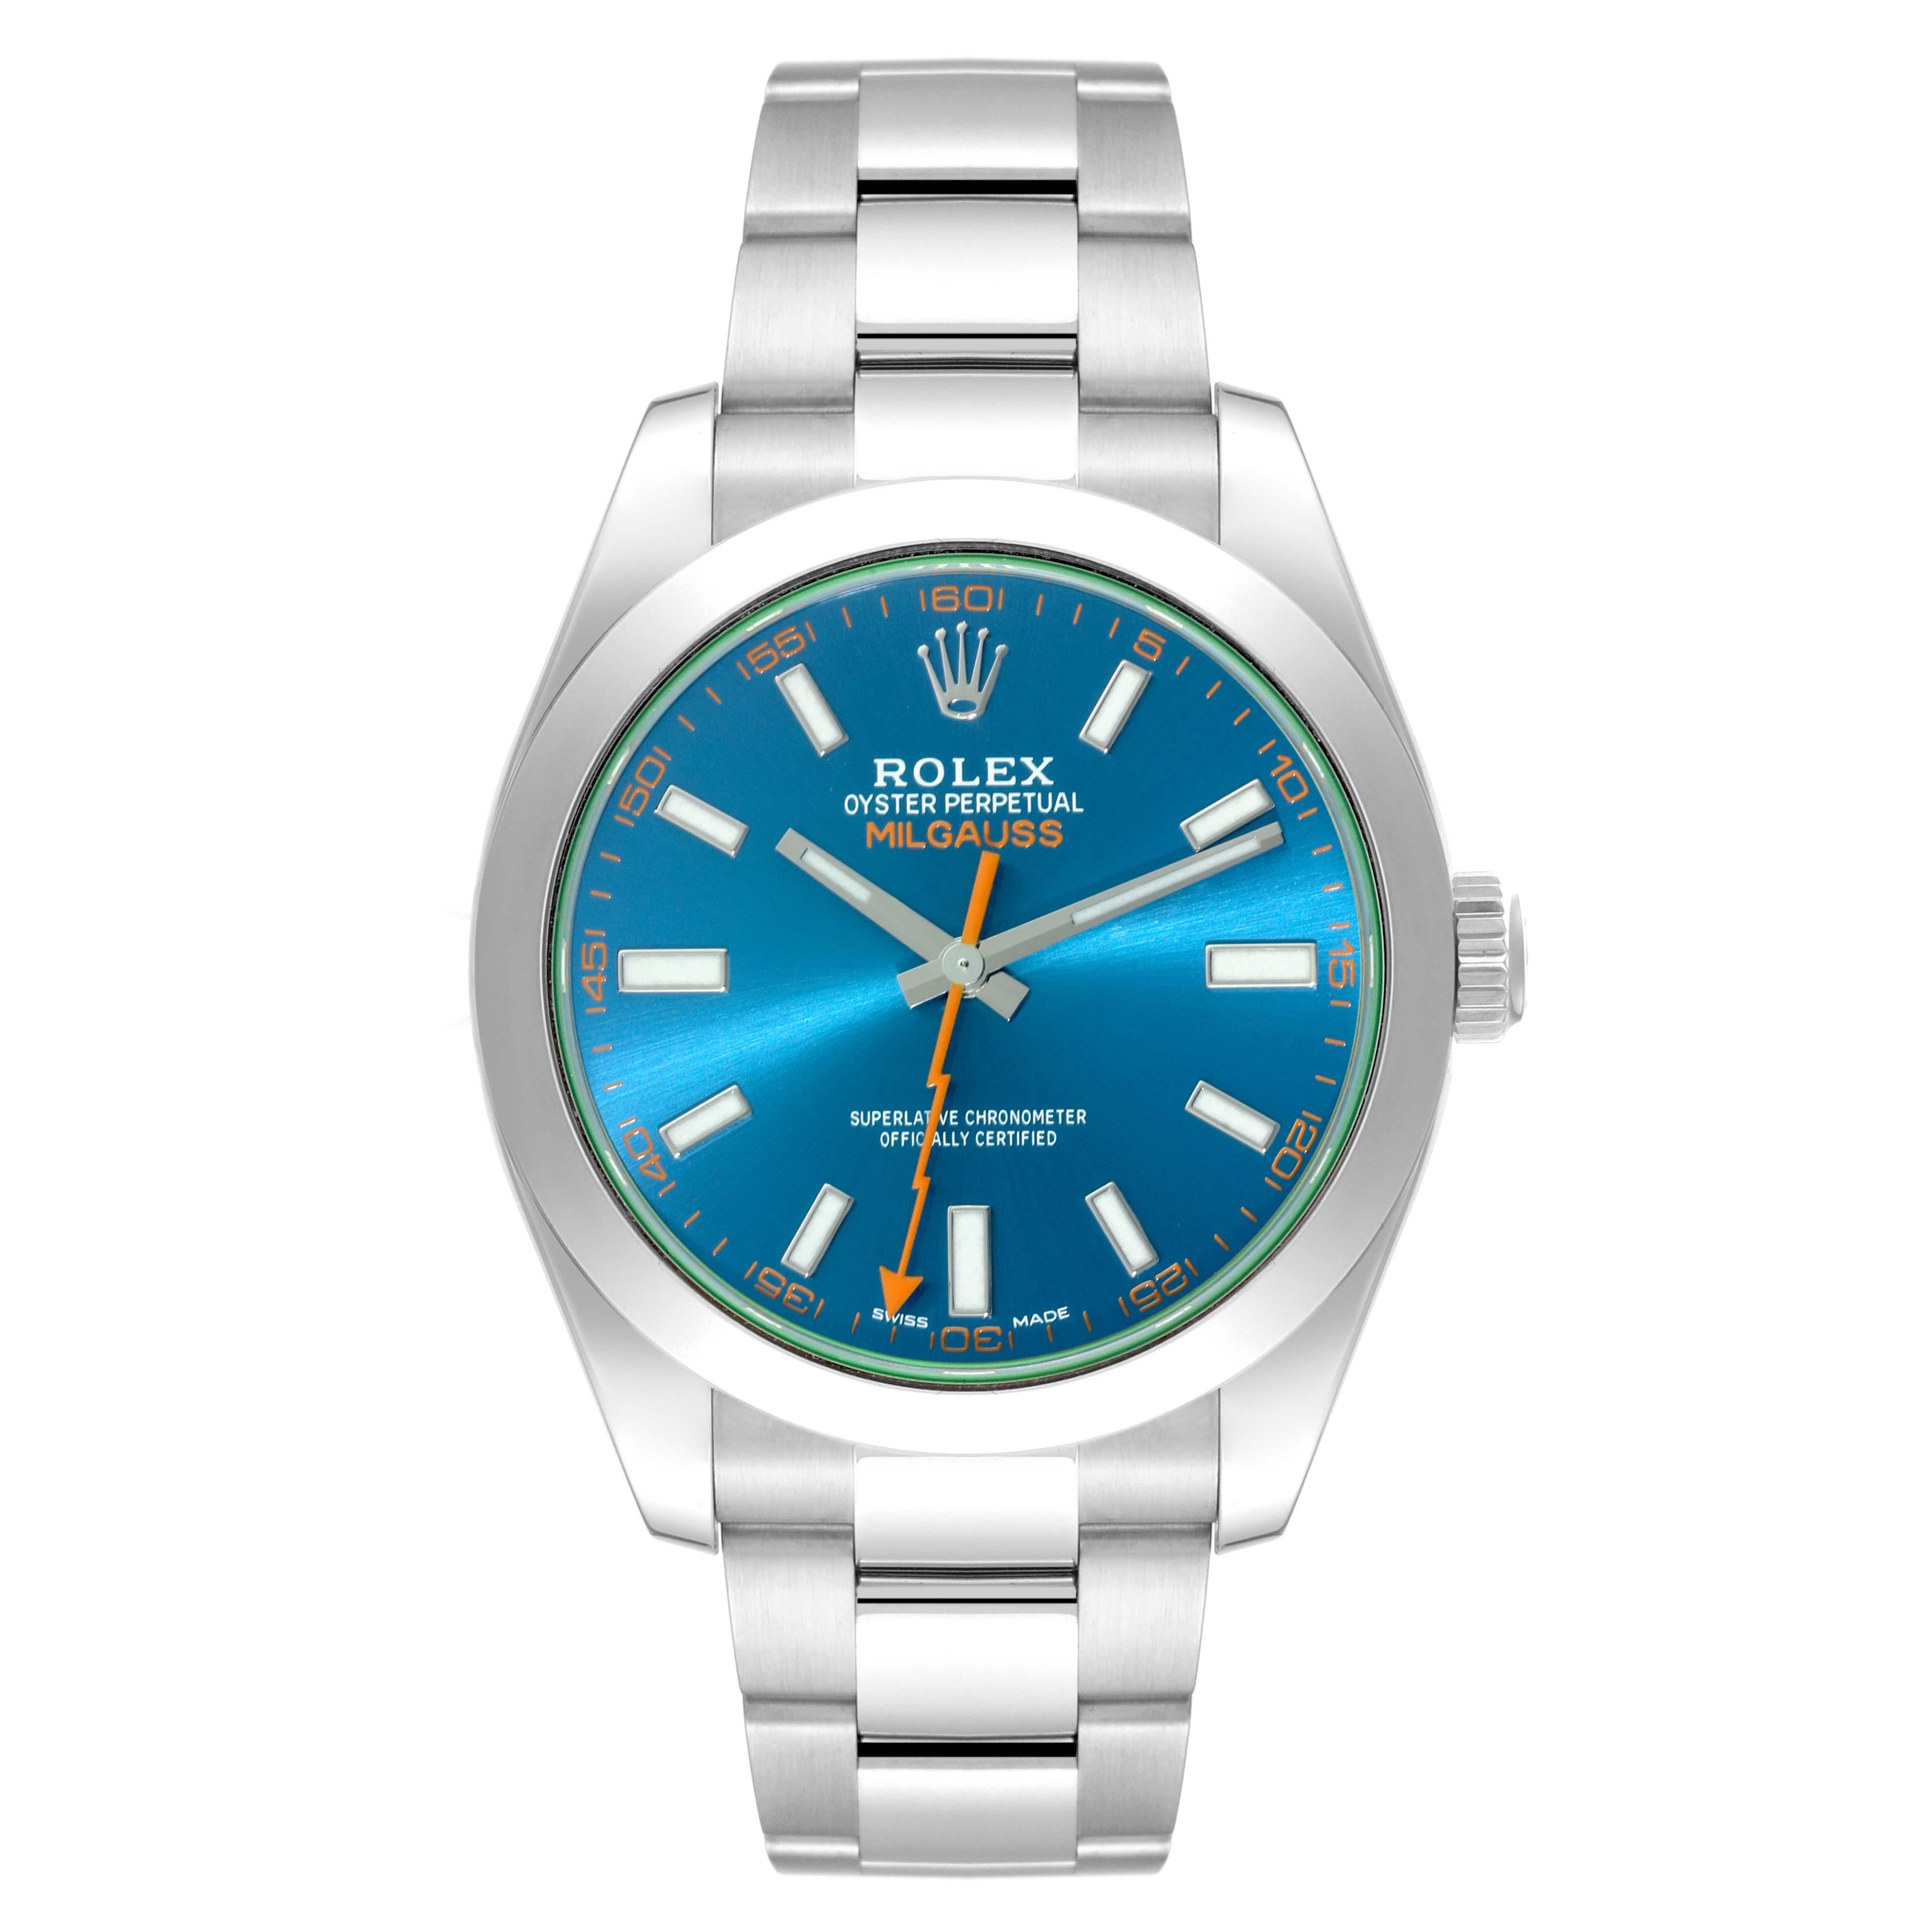 Rolex Milgauss Blue Dial Green Crystal Steel Mens Watch 116400GV Box Card. Officially certified chronometer automatic self-winding movement. Stainless steel case 40.0 mm in diameter. Stainless steel smooth bezel. Scratch resistant green sapphire